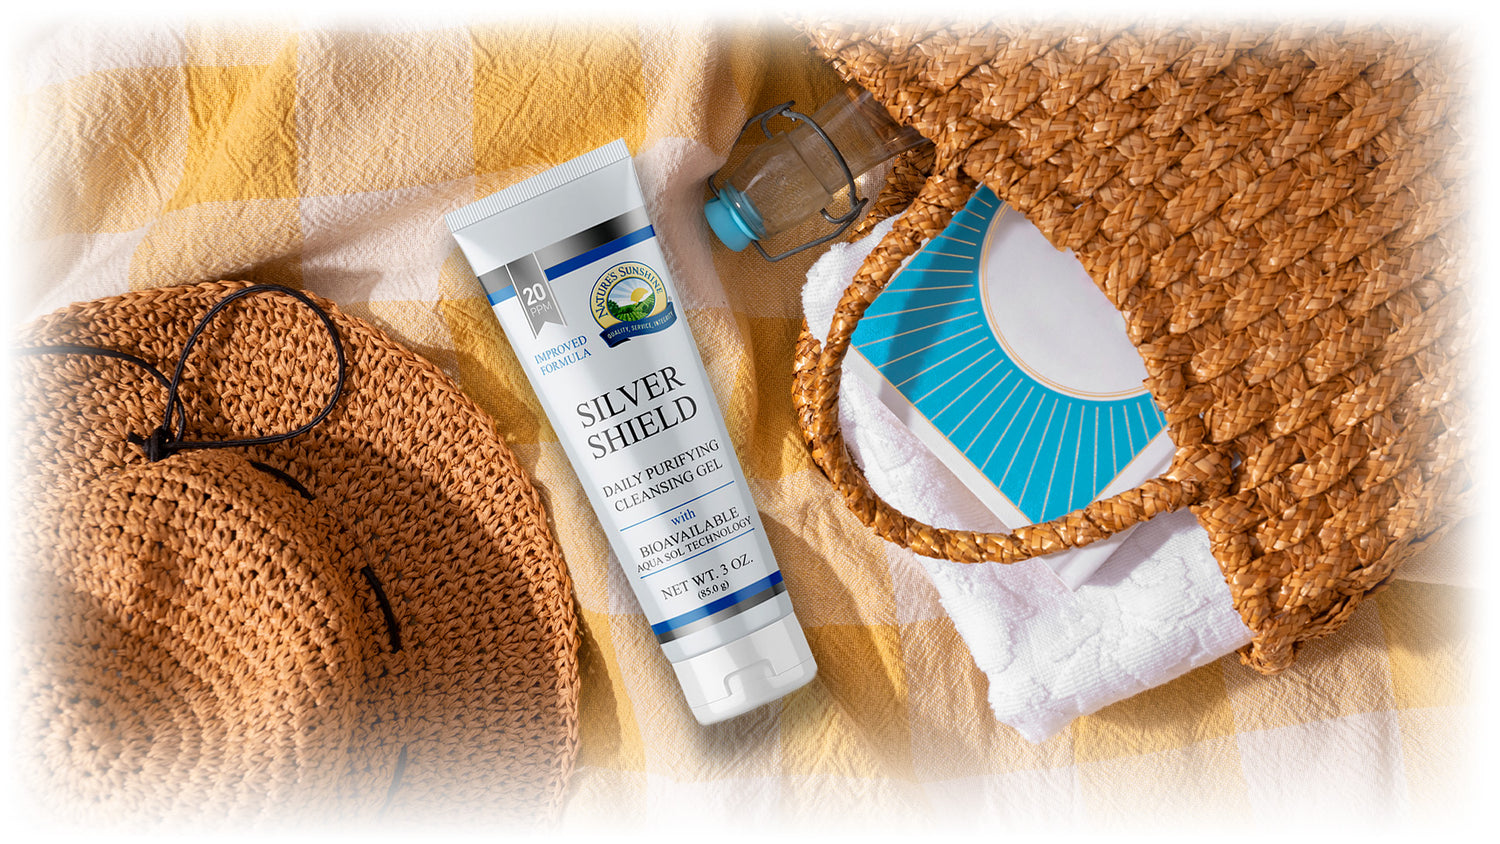 A tube of Silver Shield Gel next to a woven wicker hat and beach bag